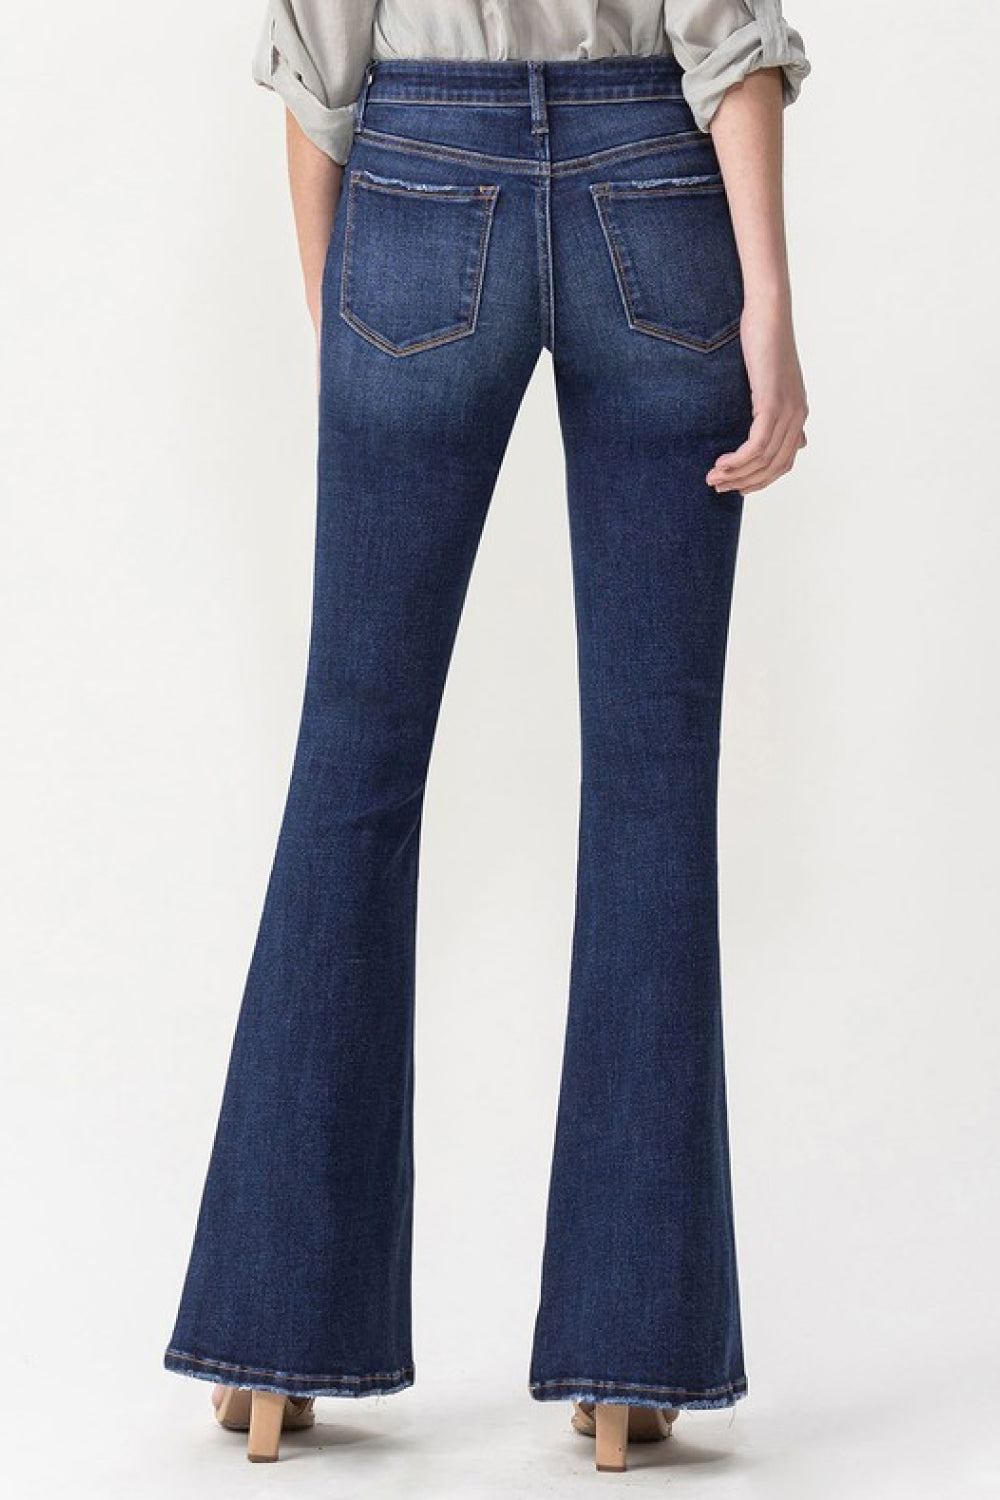 Lovervet Full Size Joanna Midrise Flare Jeans - Cheeky Chic Boutique